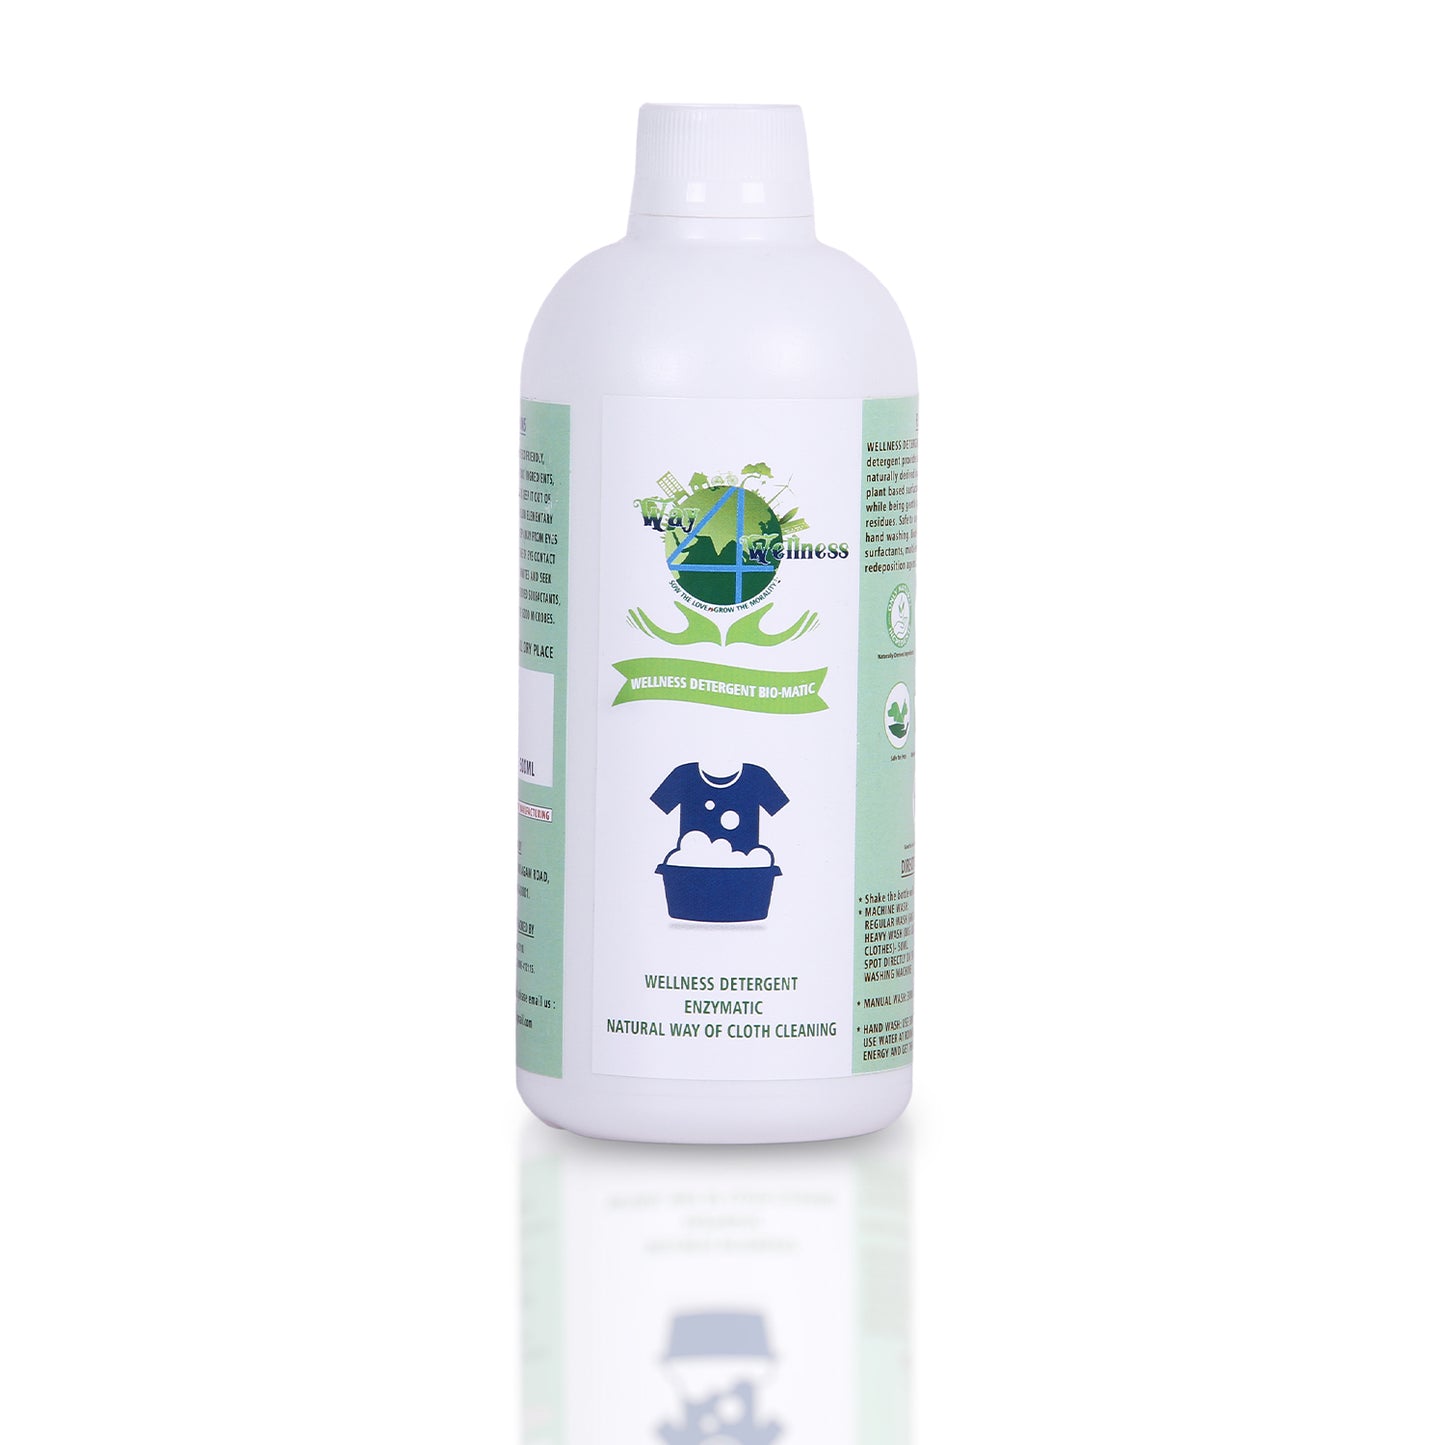 Wellness Natural Fabric Wash liquid | Natural Plant Based Liquid Detergent for Top Load & Front Load Washing Machine | Eco-Friendly, Non-Toxic | Biodegradable - 500ML